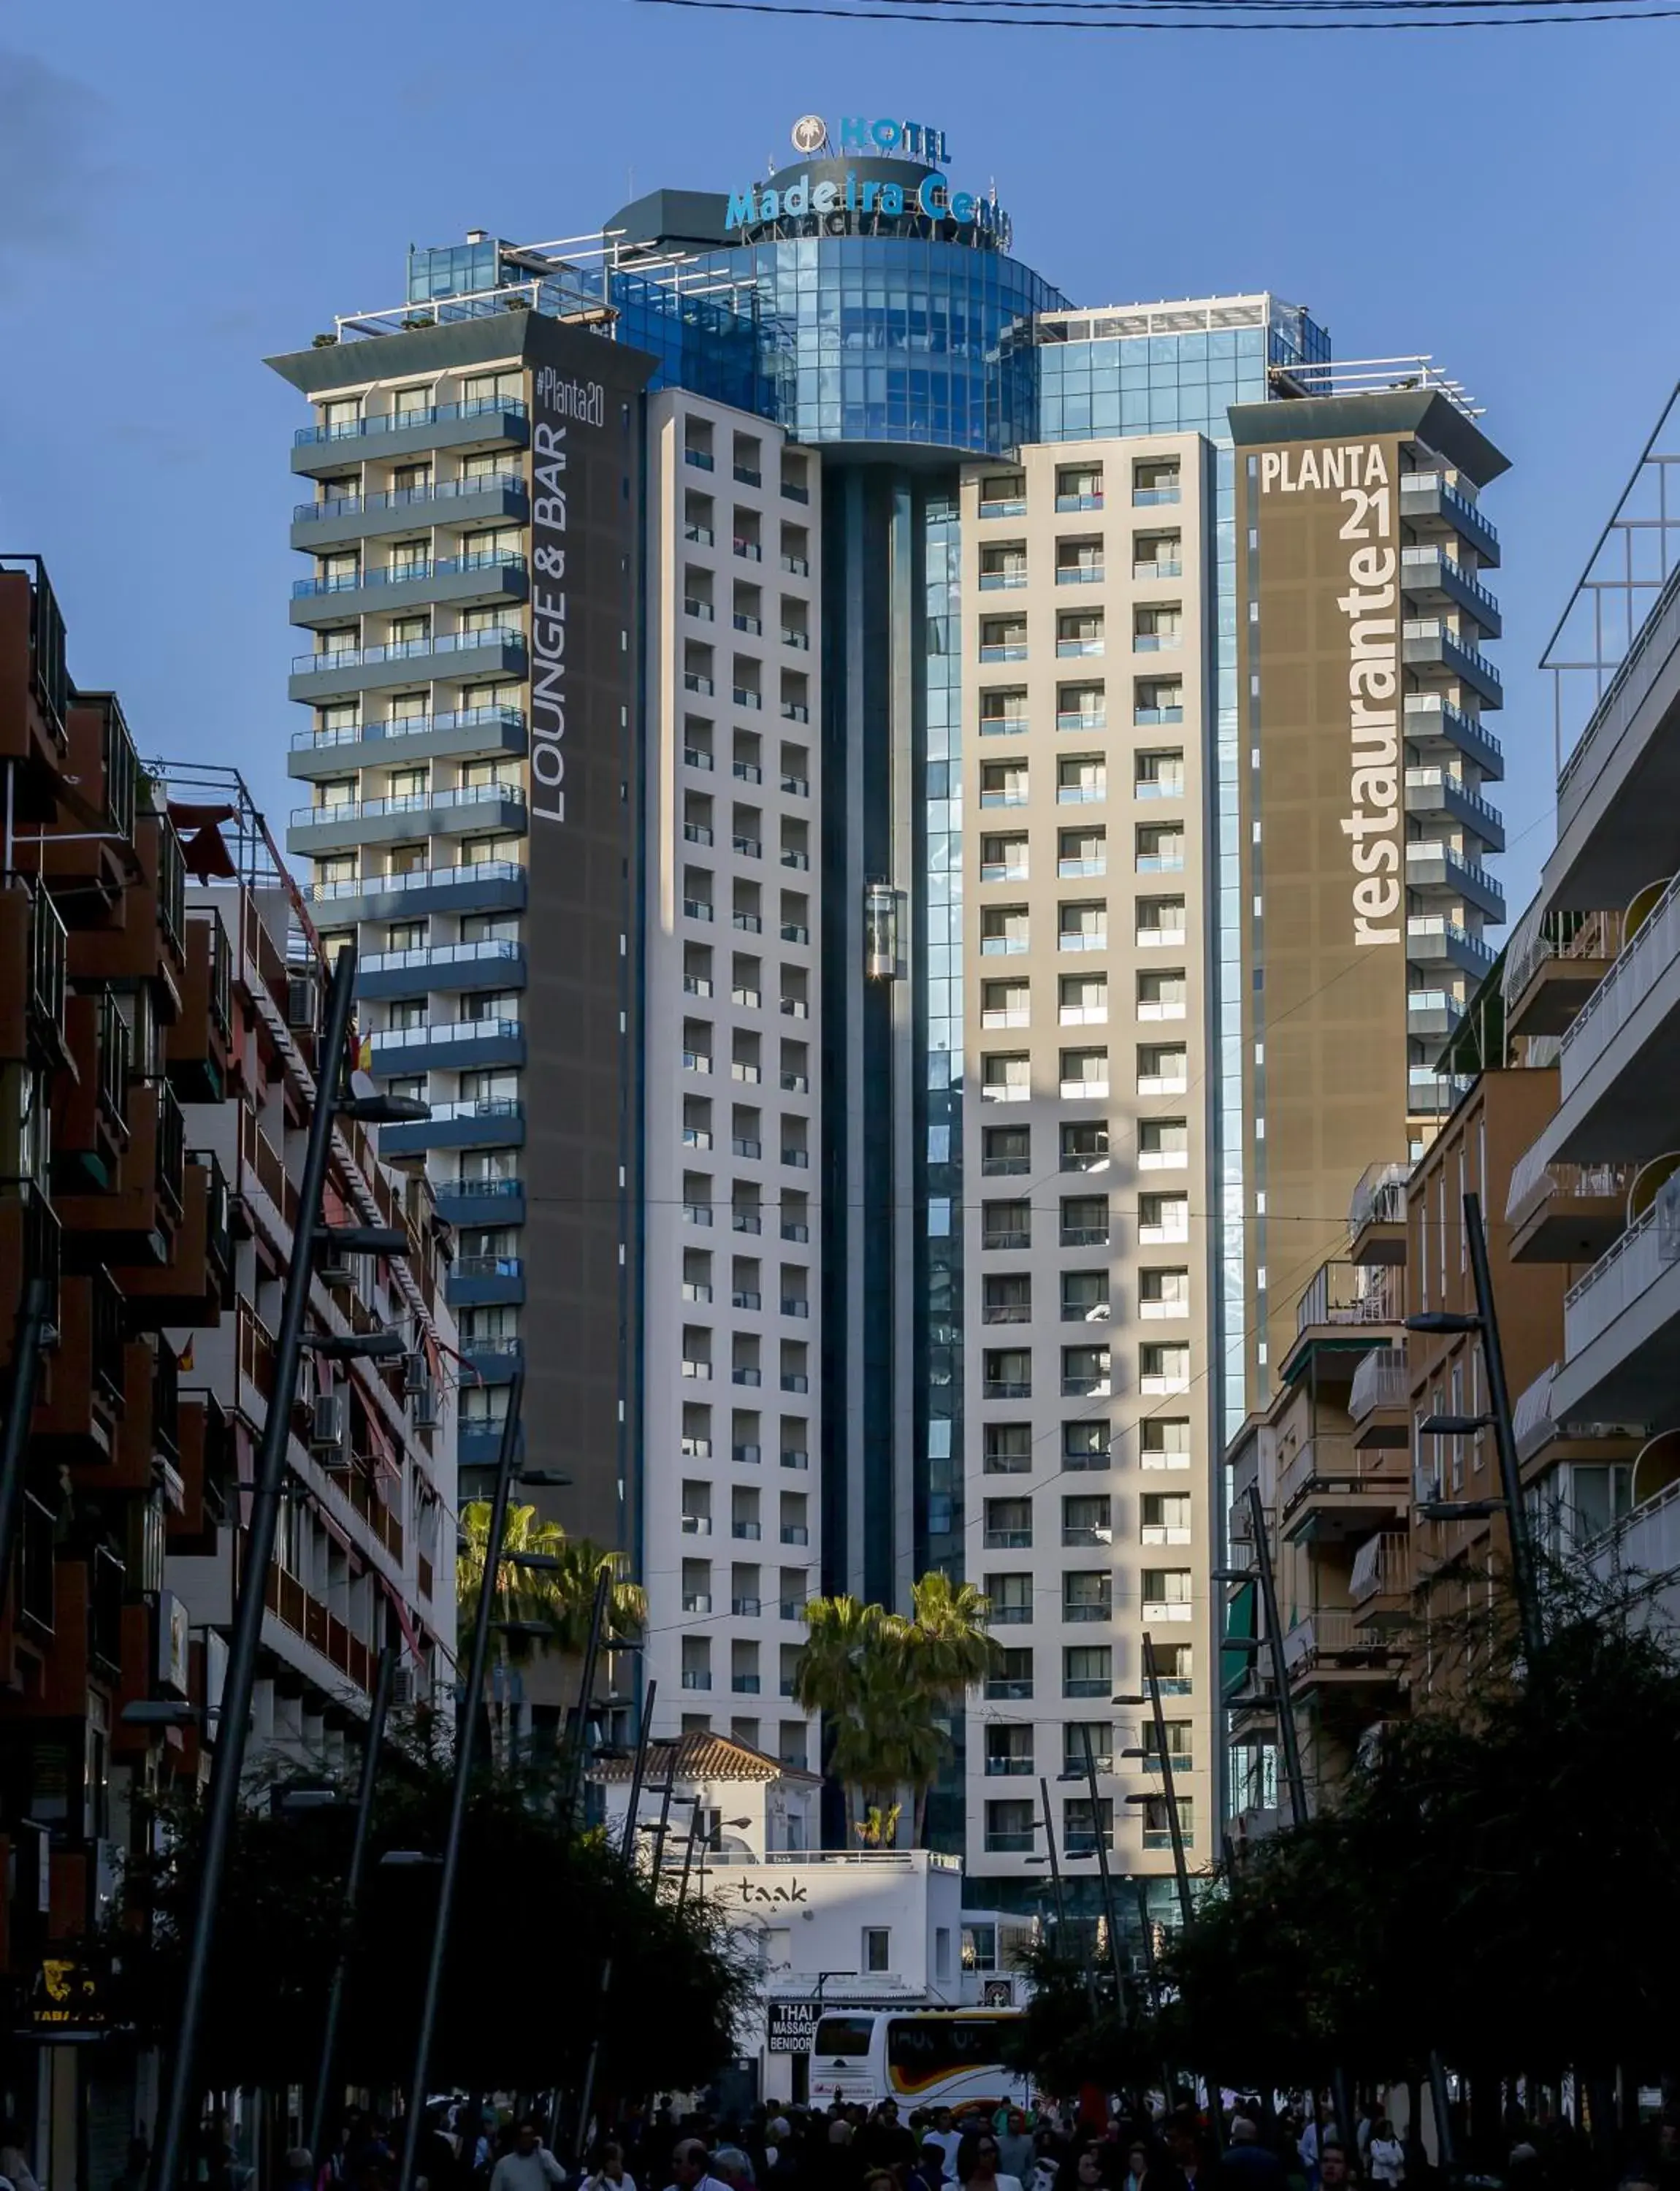 Property Building in Hotel Madeira Centro